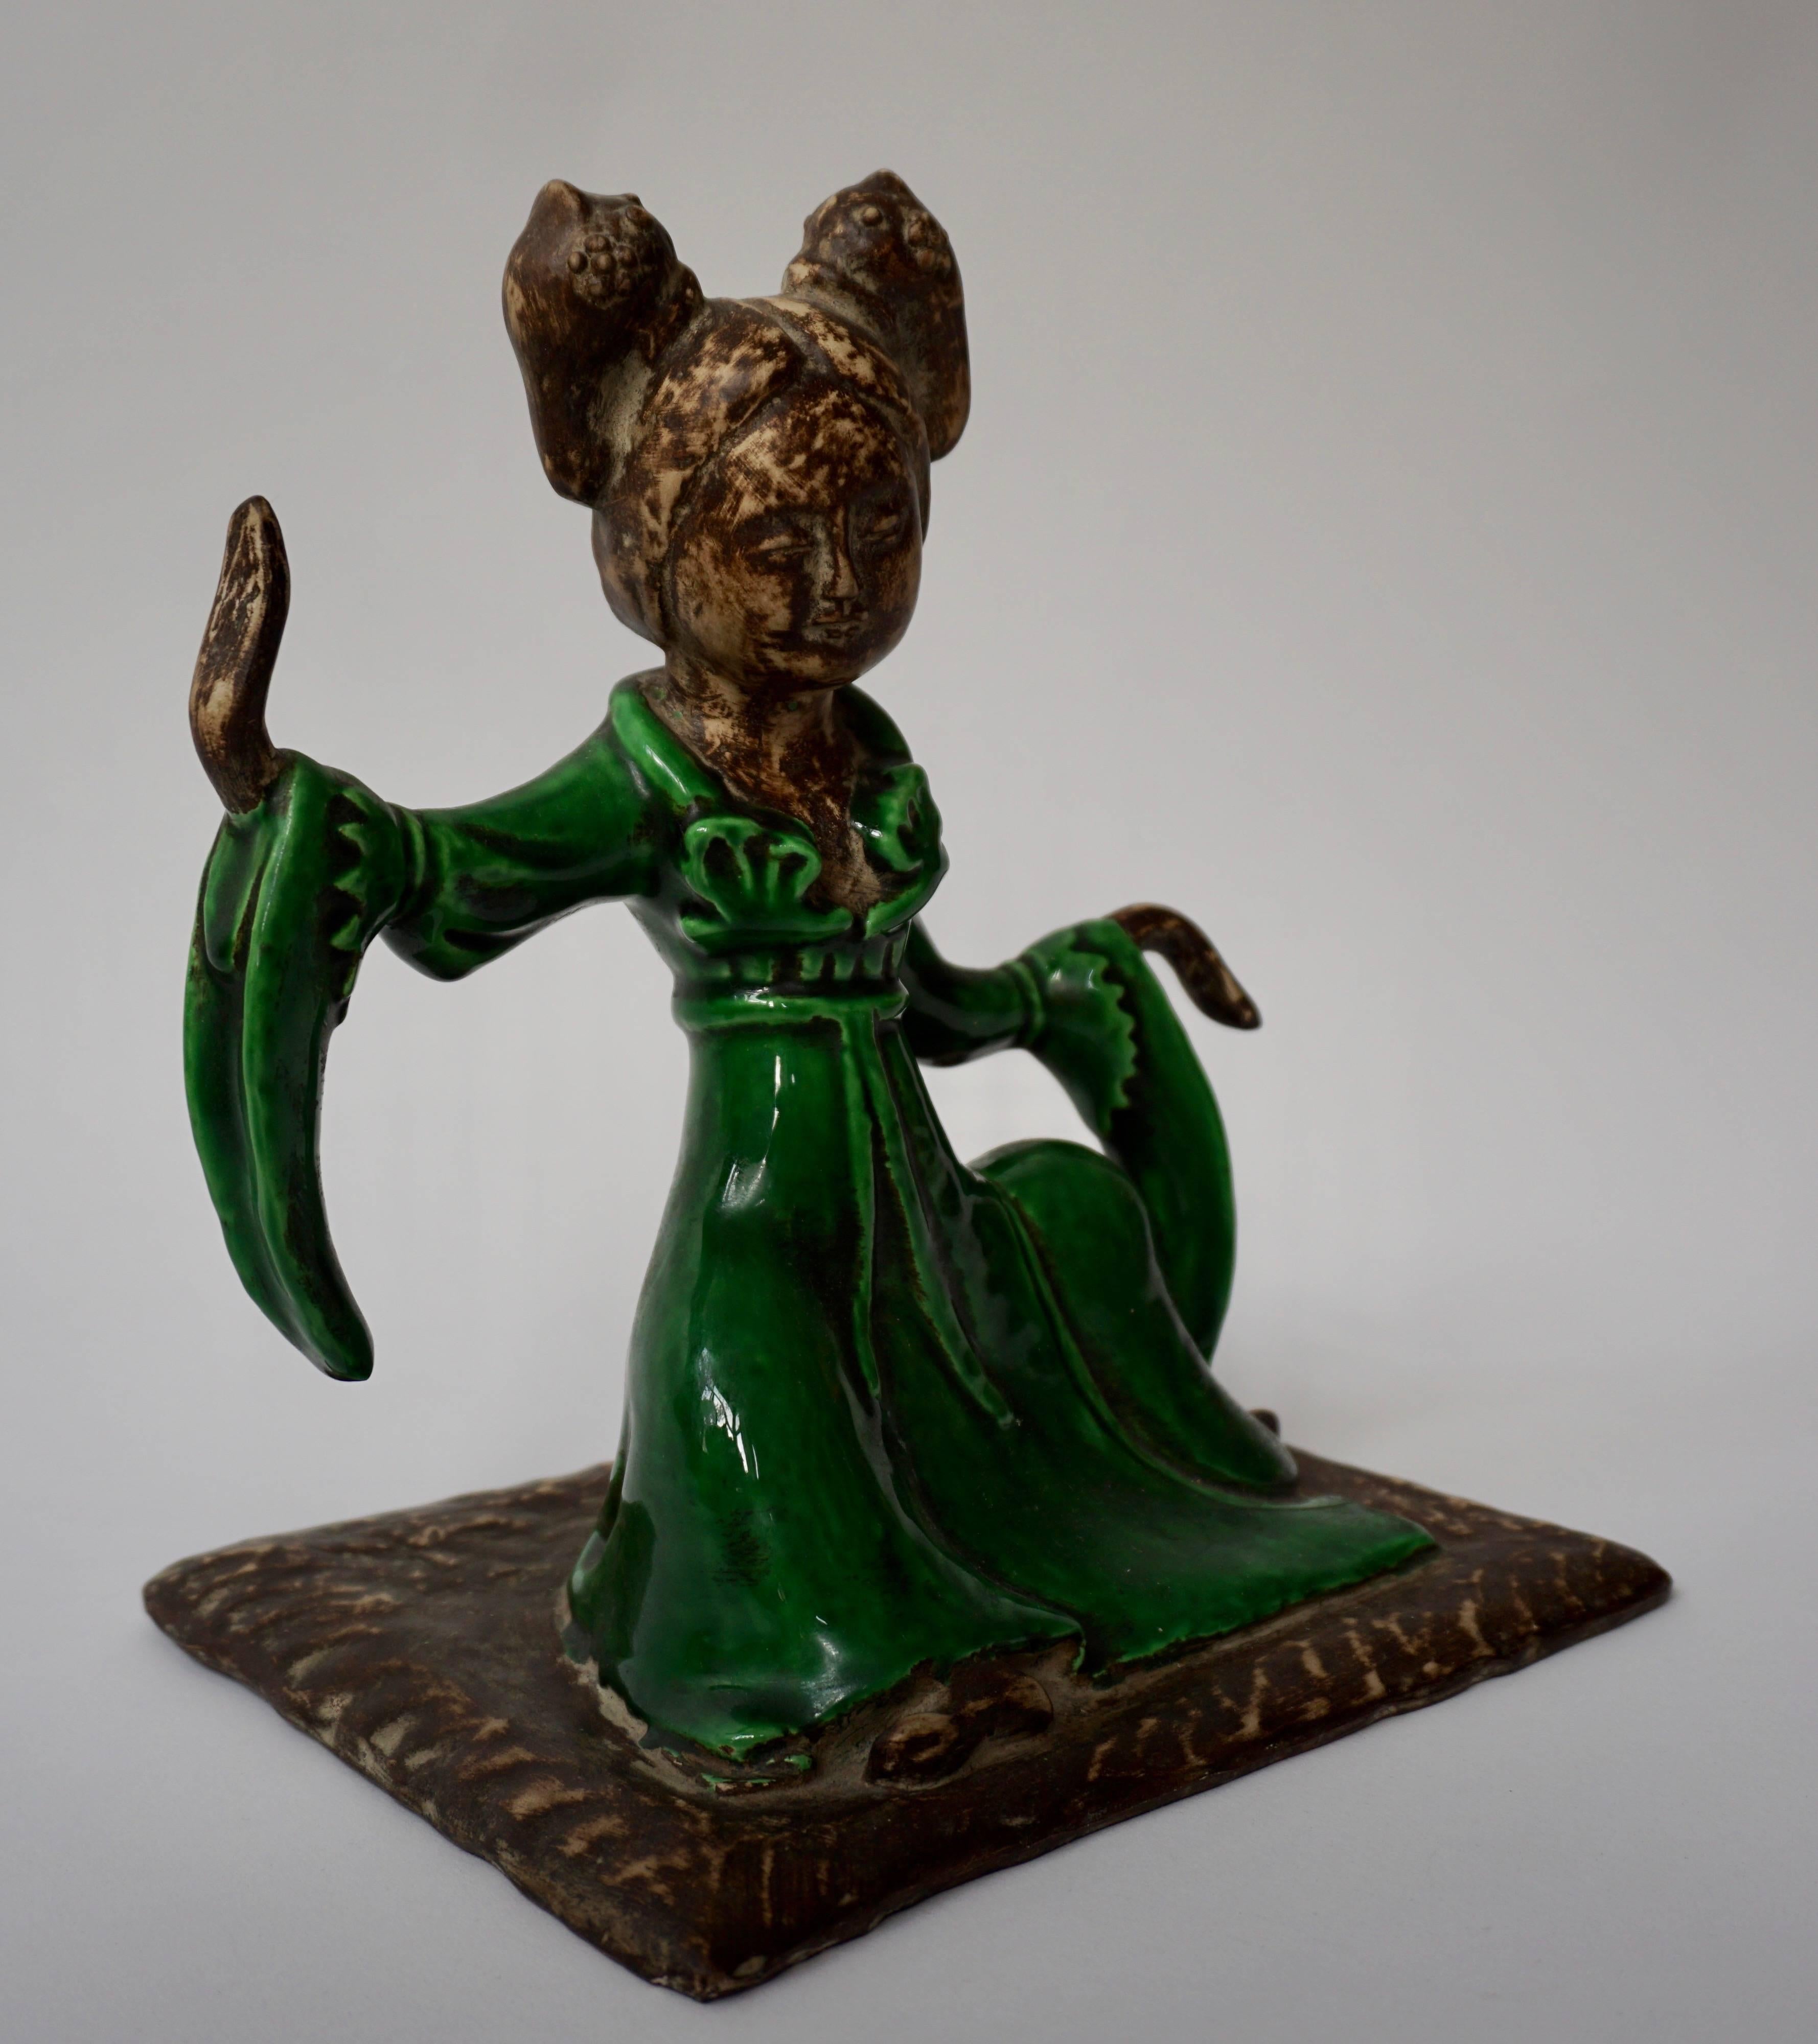 20th Century Chinese Court Musician Figurine by Zaccagnini